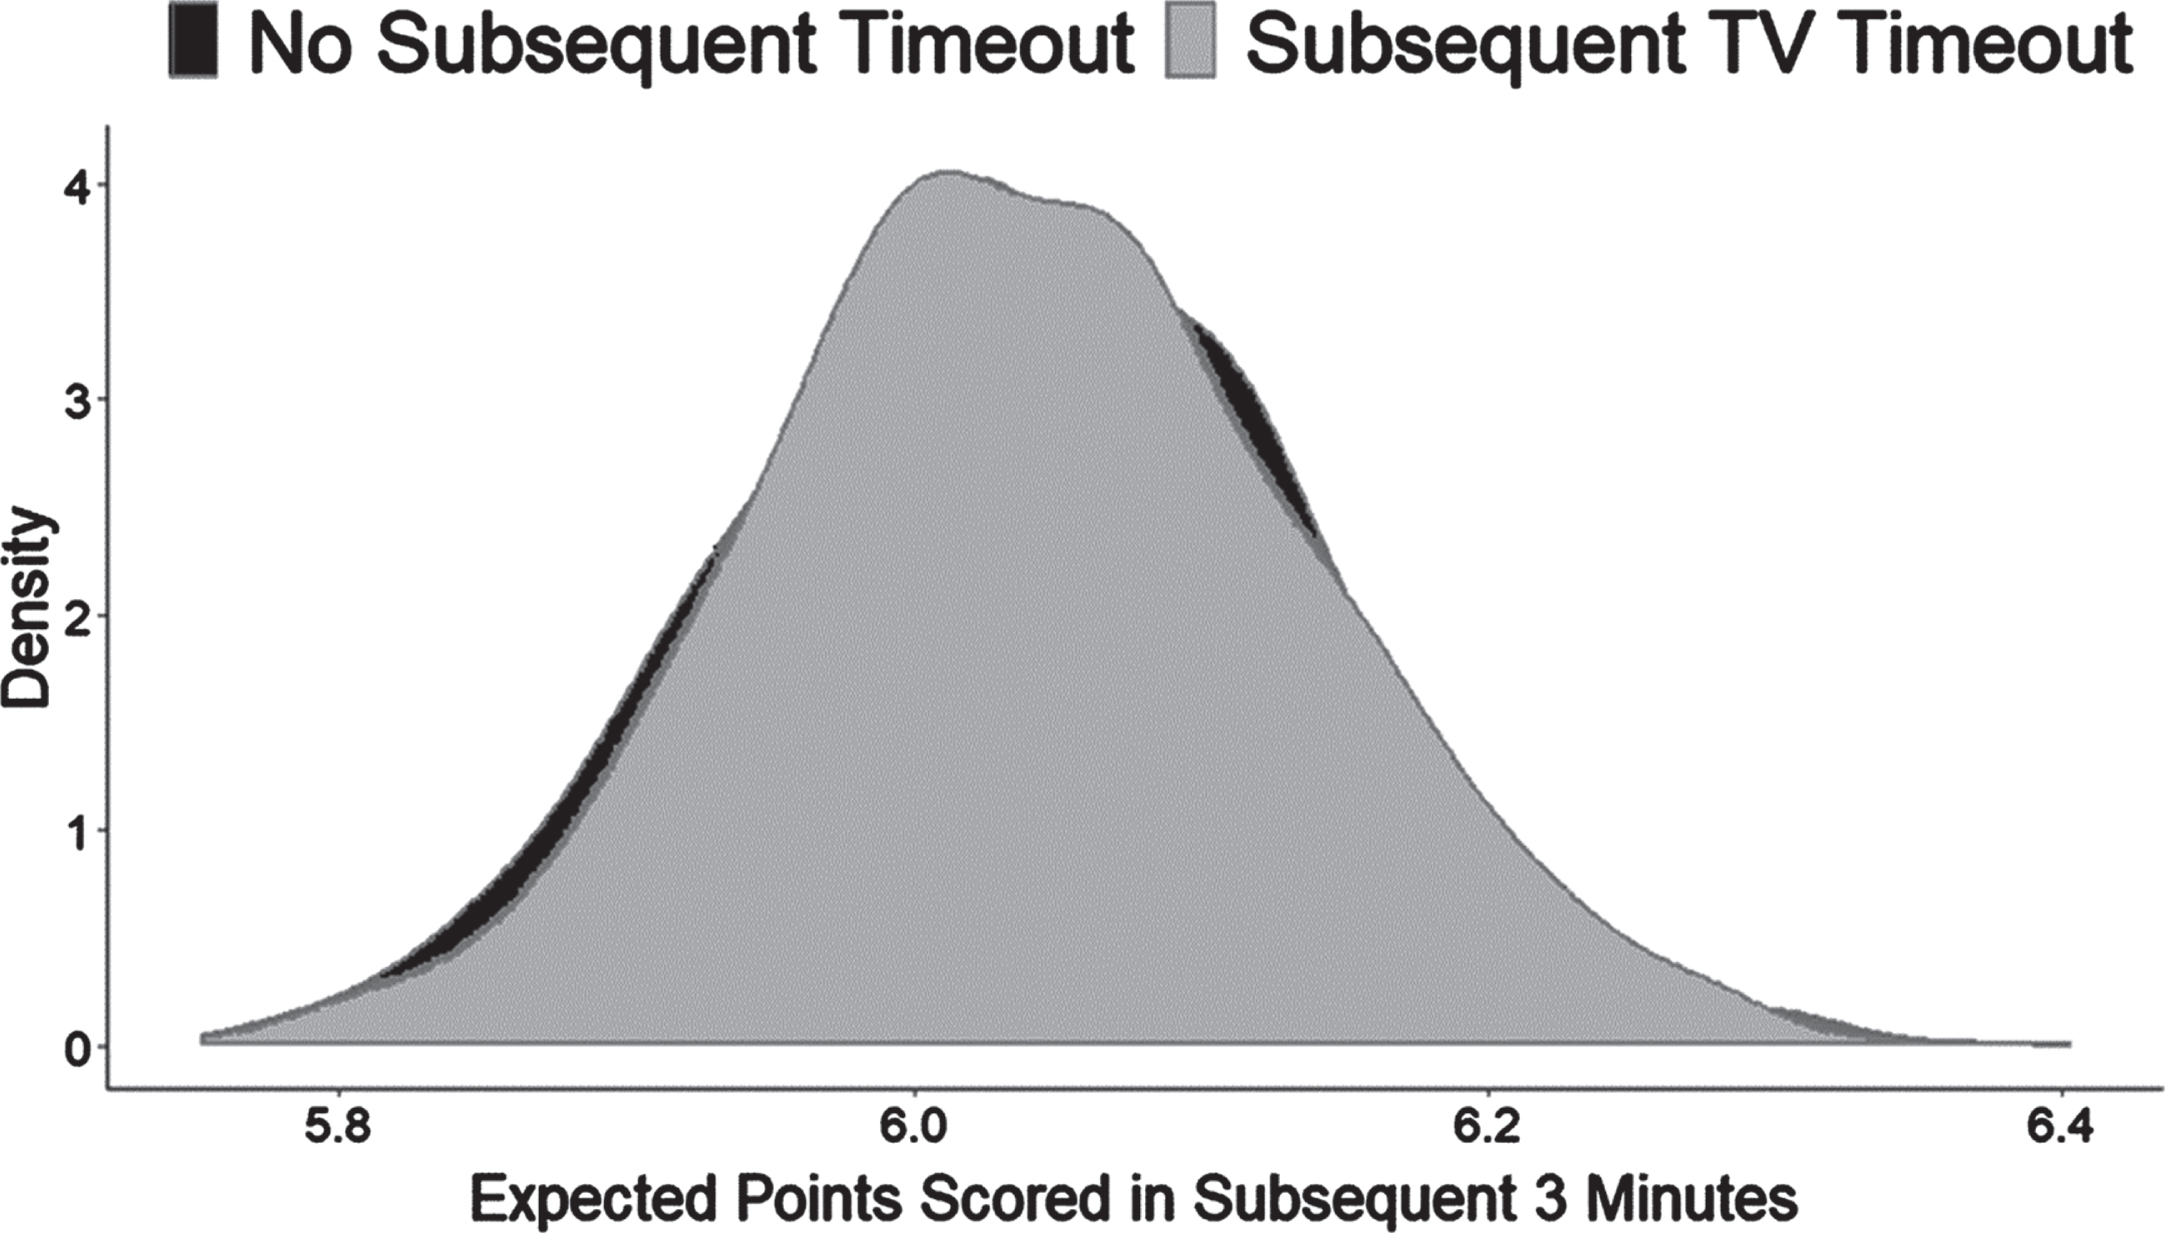 Monte Carlo Simulation Results. Each observation in this histogram is a run of the simulation model where the momentum effect is set to zero - that is, simulated TV timeouts have no effect on gameplay. The distribution of expected points scored following the stoppage in play is the same whether or not there was a simulated TV timeout: this serves as a negative control, showing that the matched pairs study design used in this paper correctly fails to observe an effect when no such effect exists.